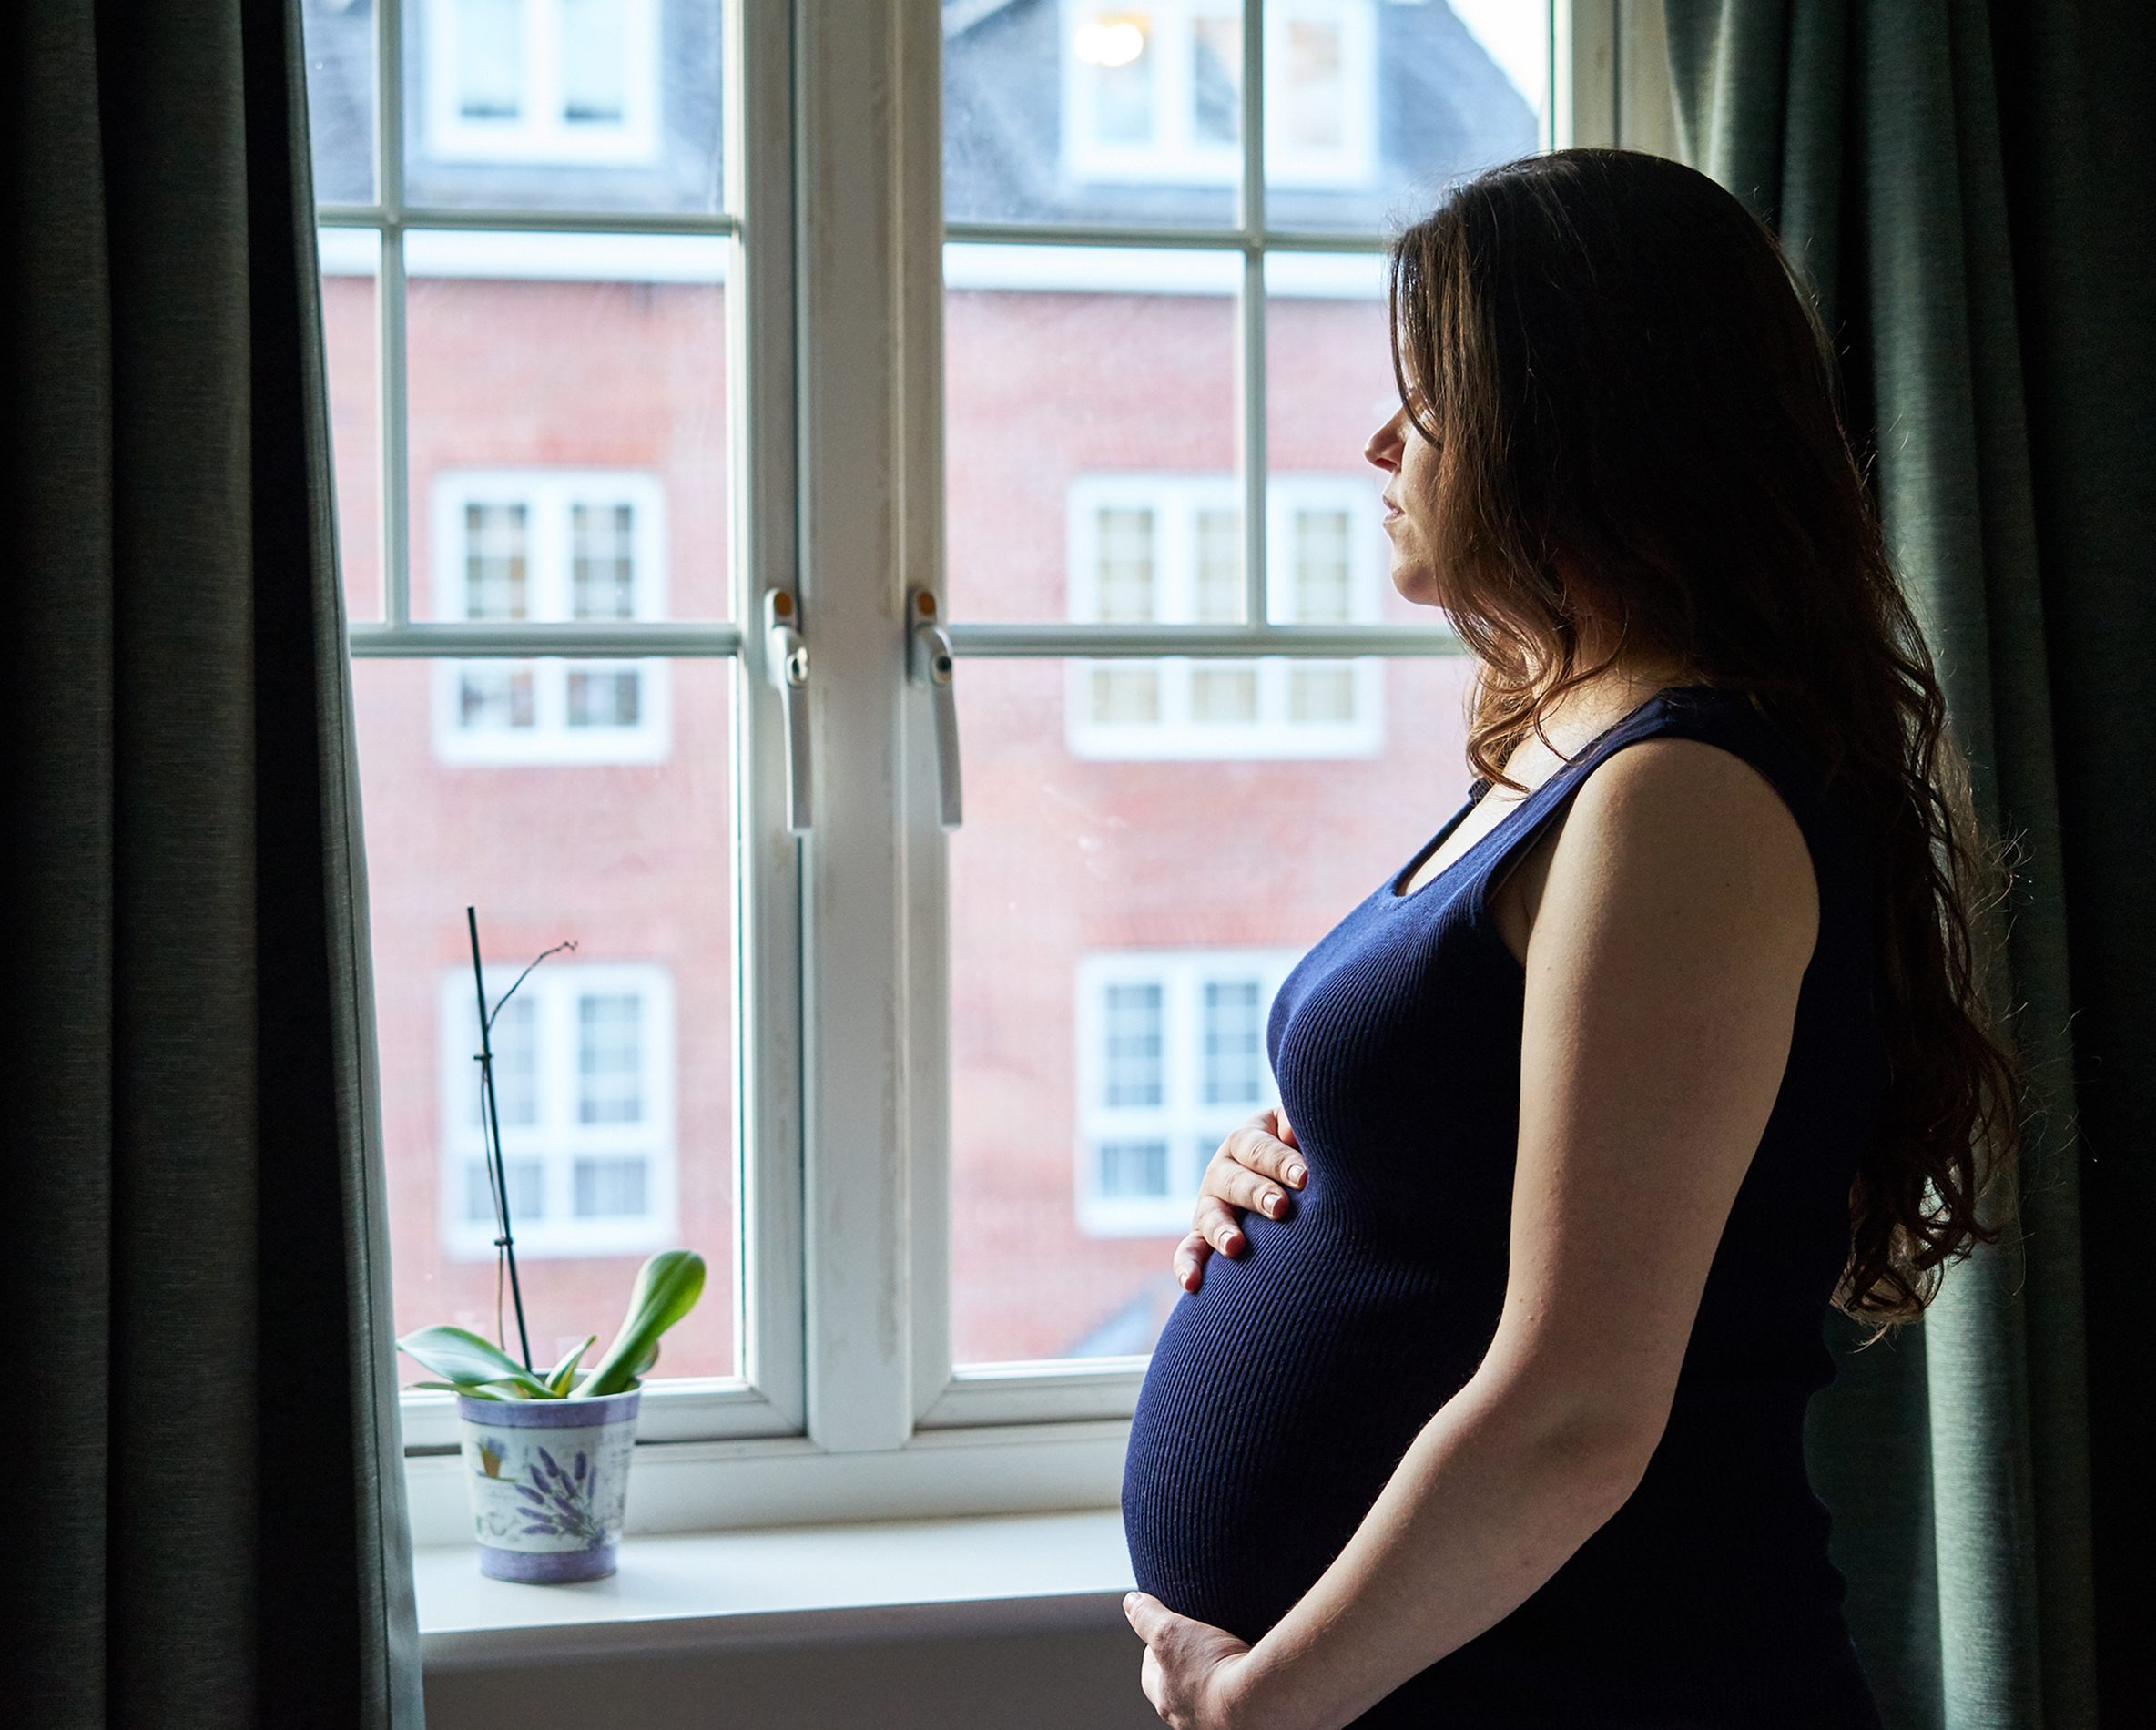 A heavily pregnant woman standing and holding her belly while looking outside a window | Source: Shutterstock